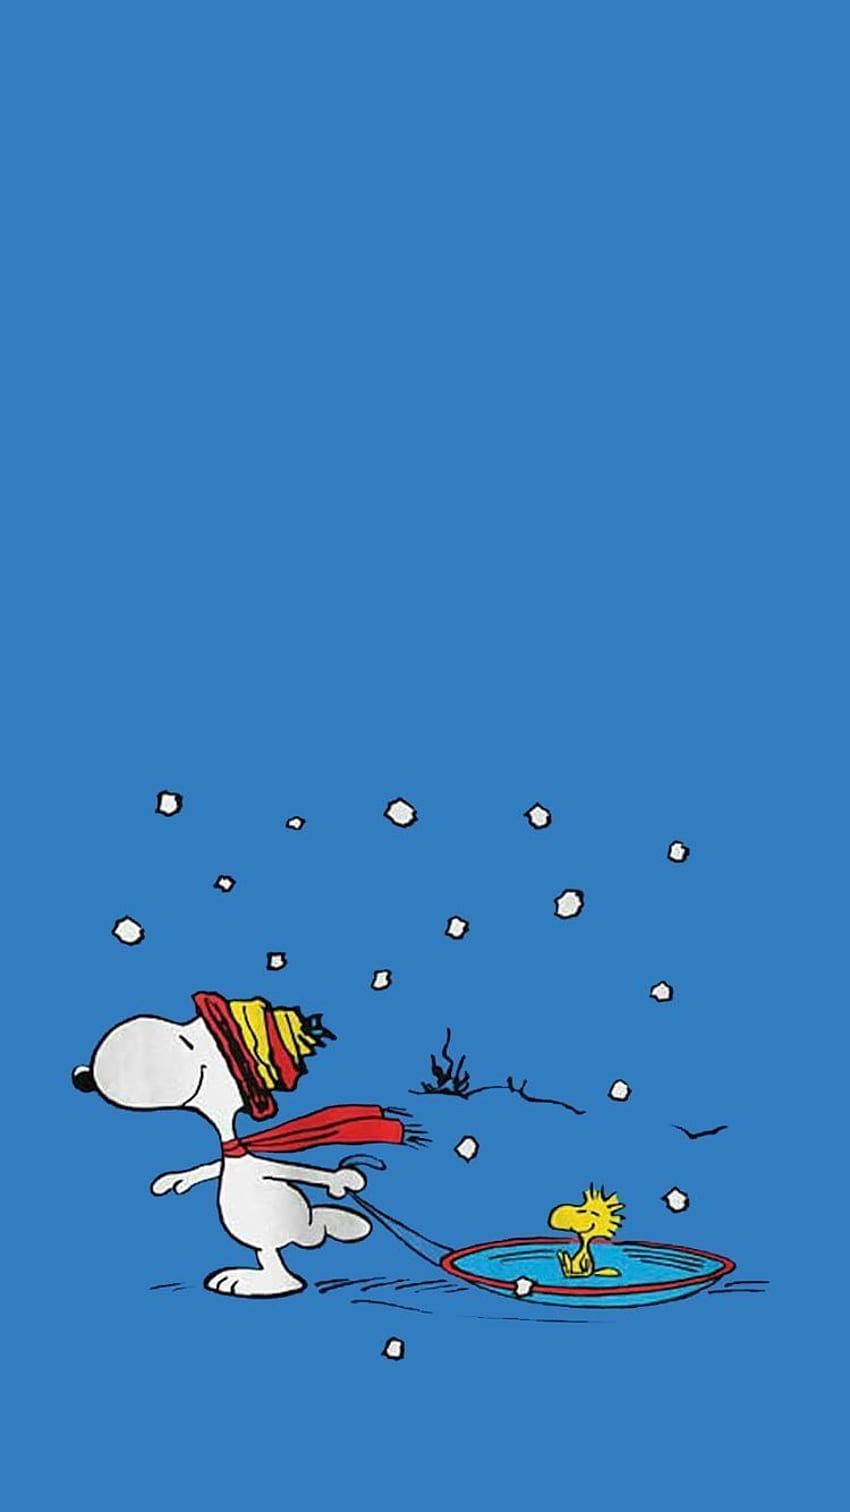 Snoopy 4ever  Snoopy wallpaper, Snoopy pictures, Charlie brown and snoopy